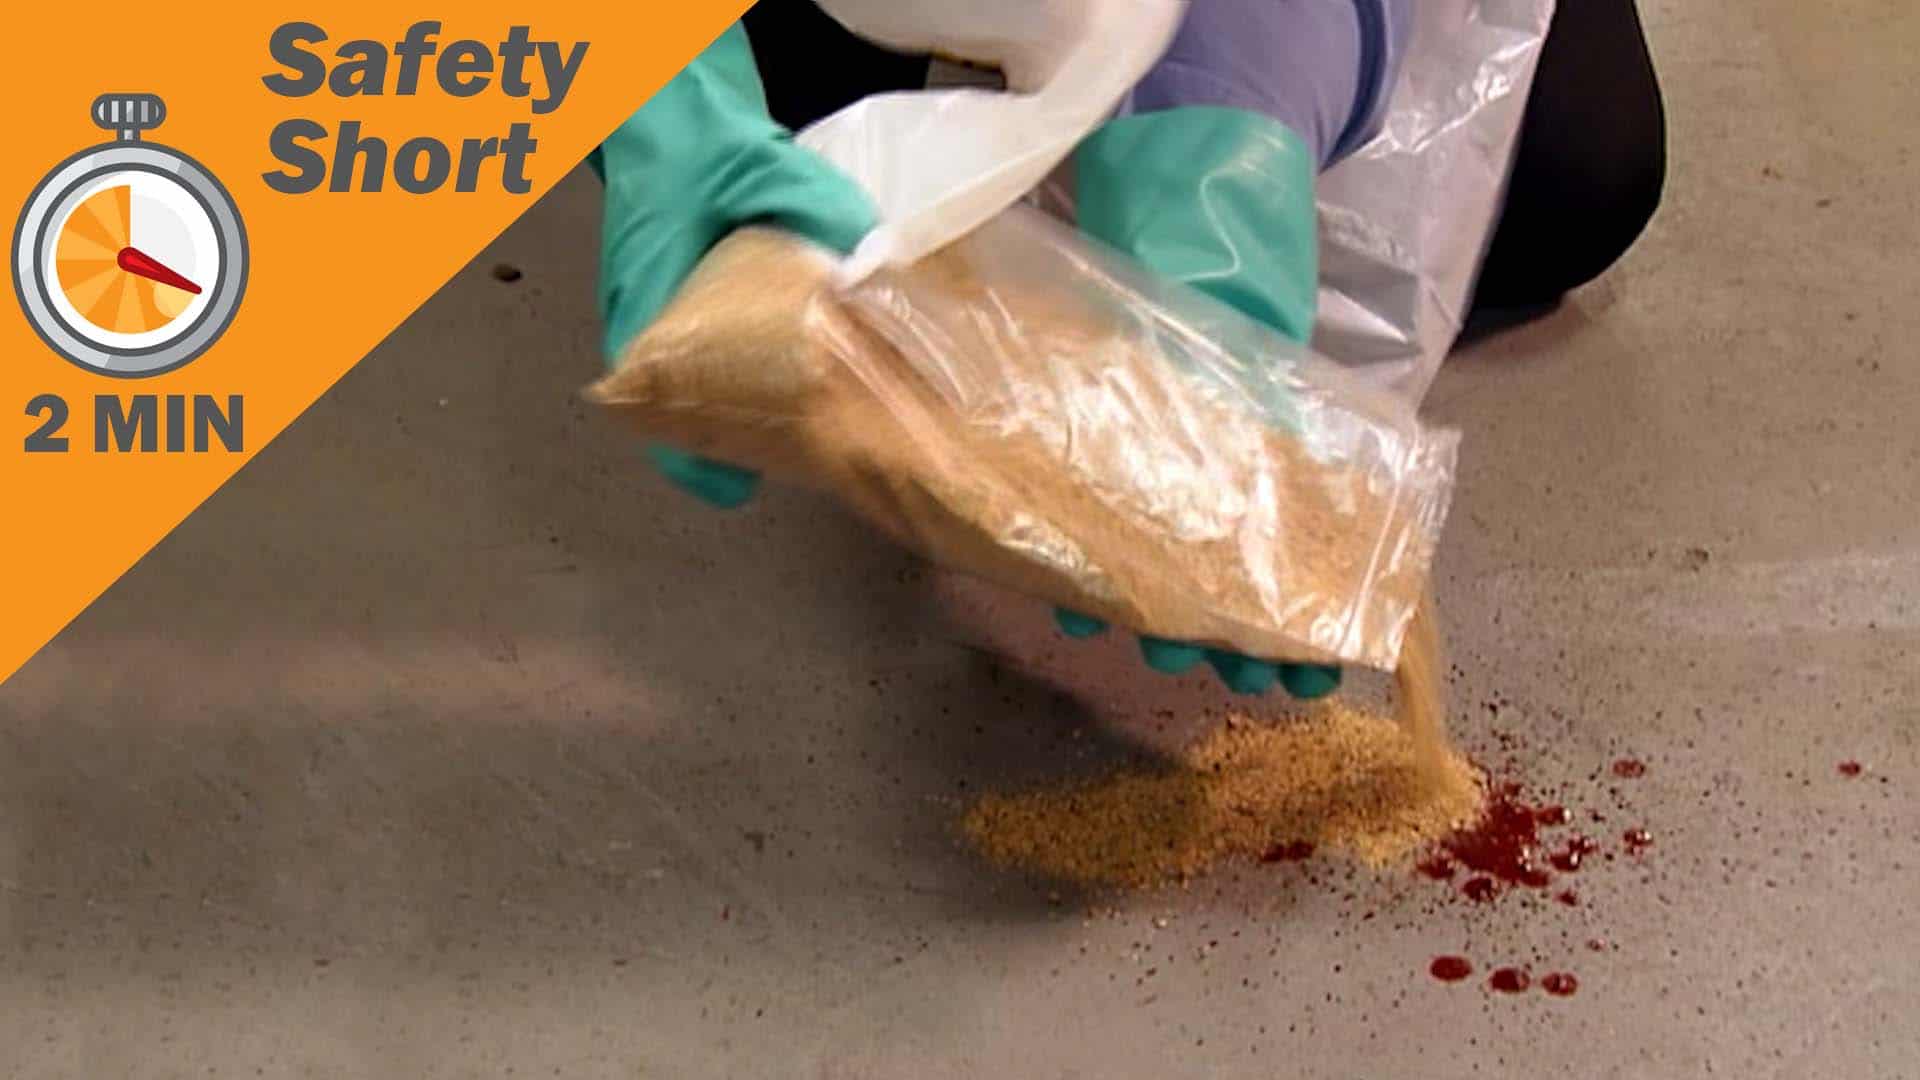 How to Clean up Blood and Body Fluid Spills